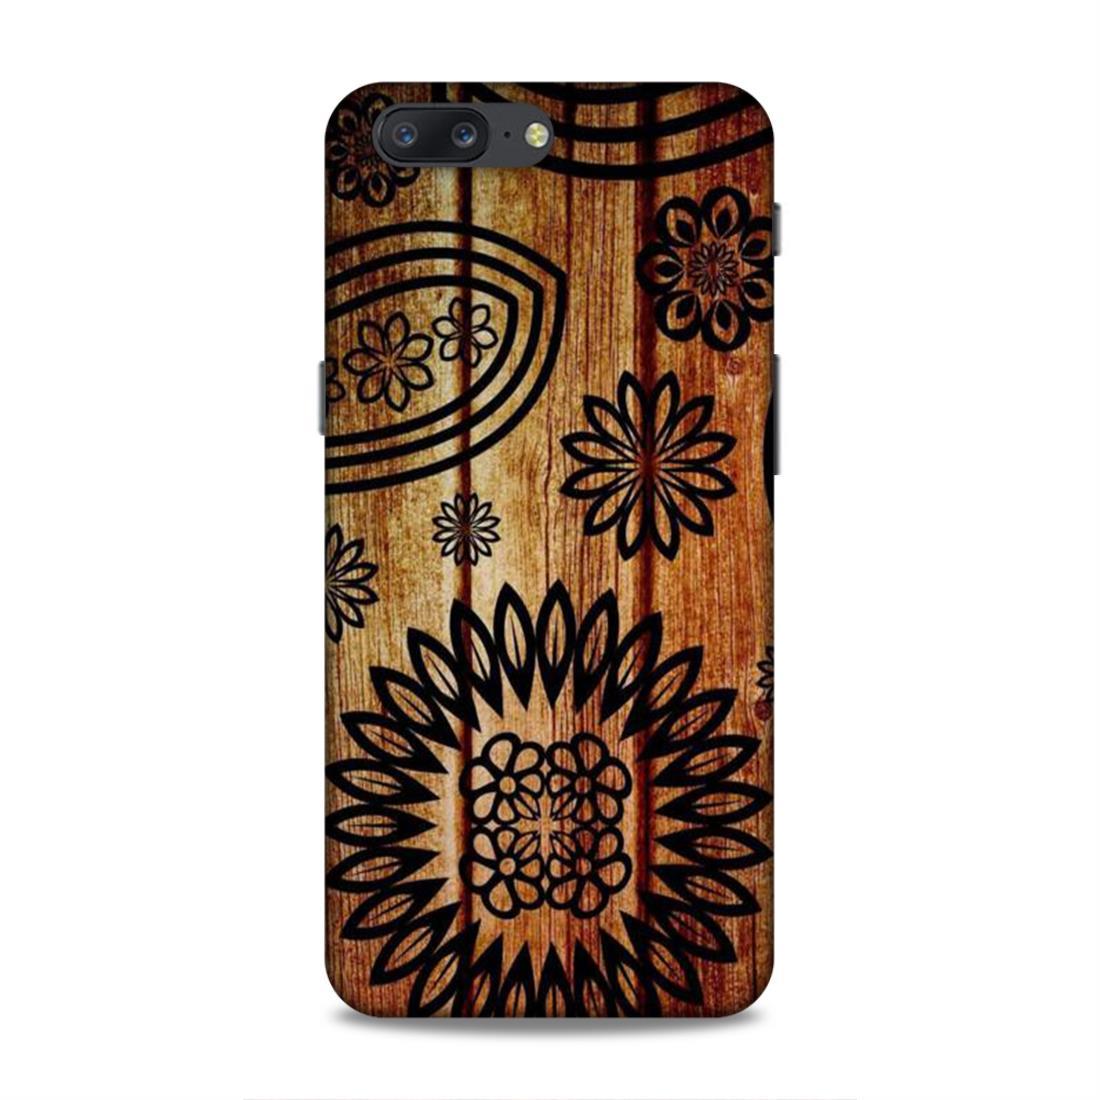 Wooden Look Pattern OnePlus 5 Mobile Case Cover